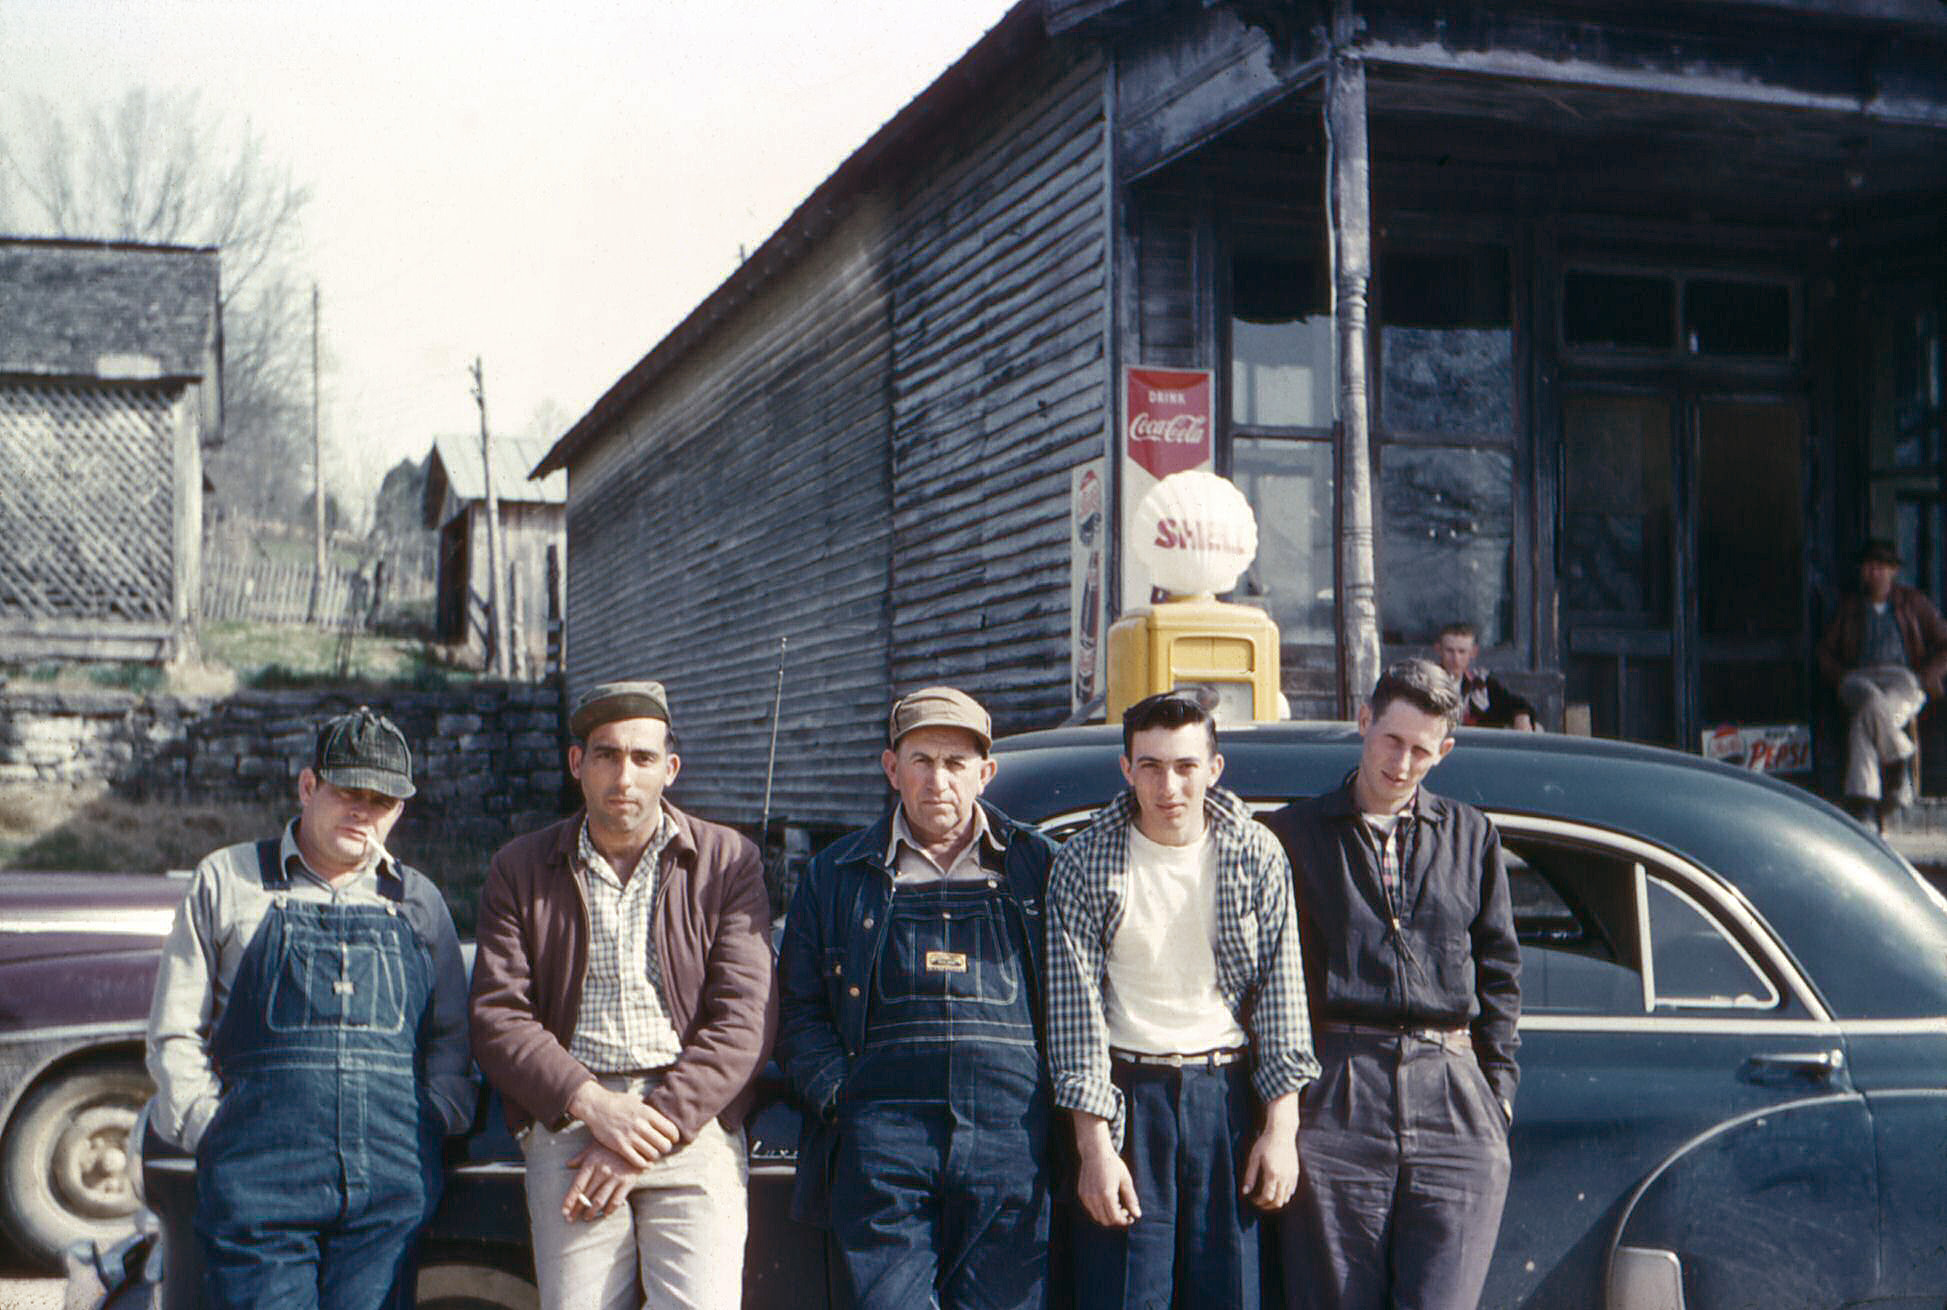 This motley crew includes two of my uncles on the far right. The photo was taken by my father about 1960 in Leatherwood, Tennessee, in Hickman County. View full size.